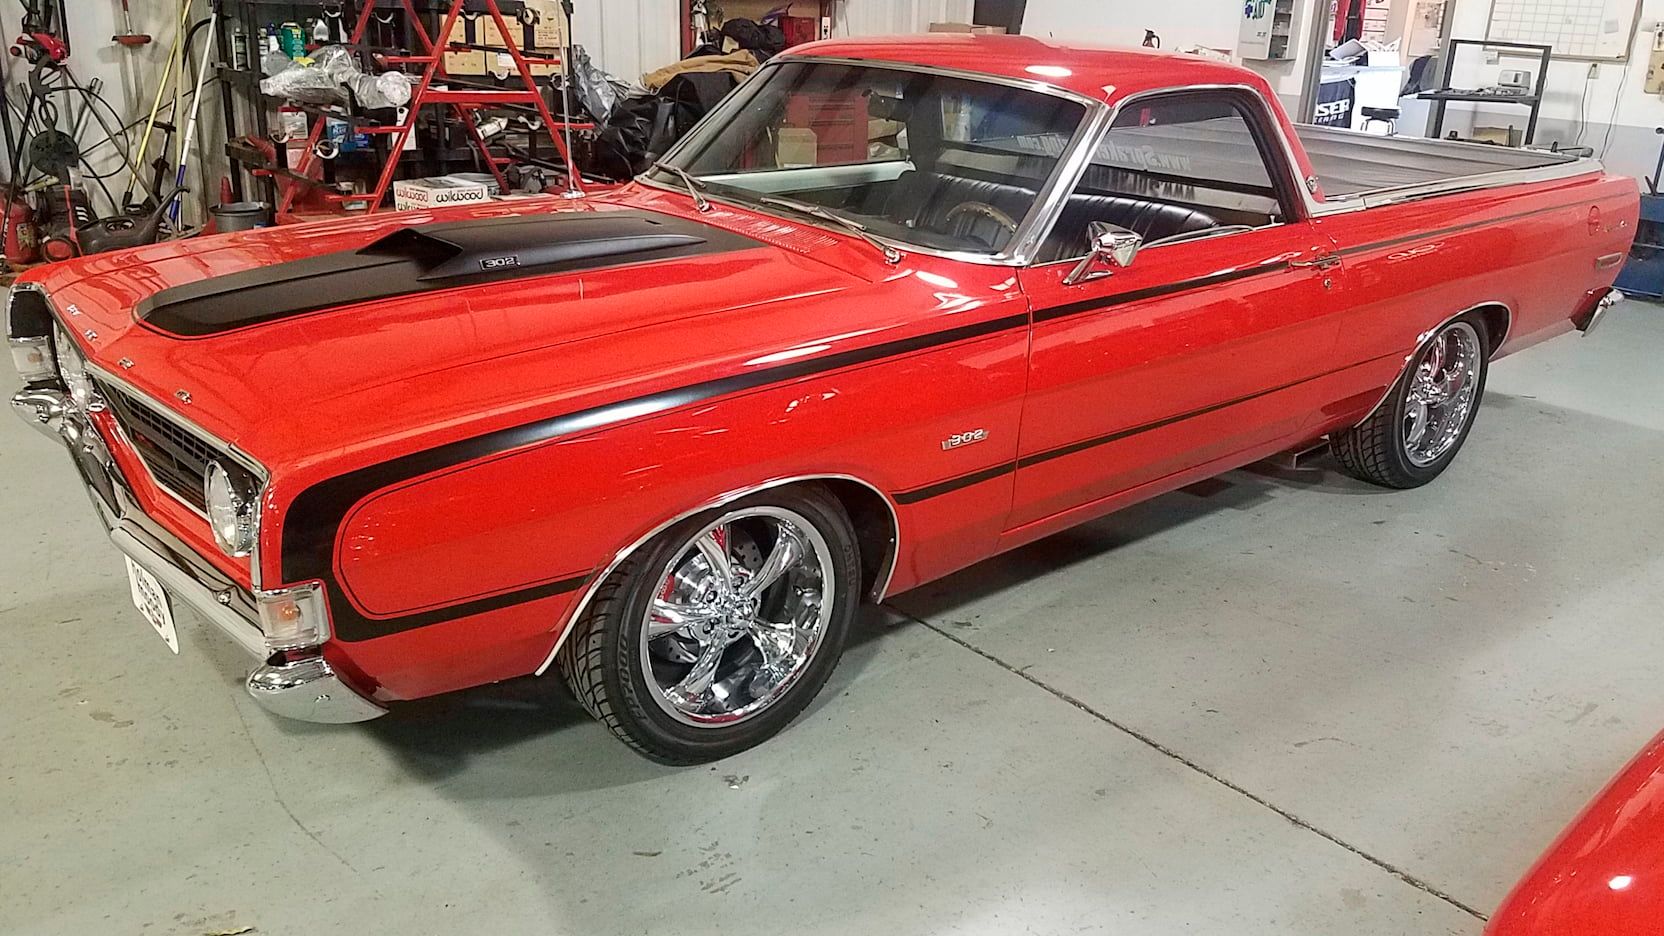 A parked 1968 Ford Ranchero on display